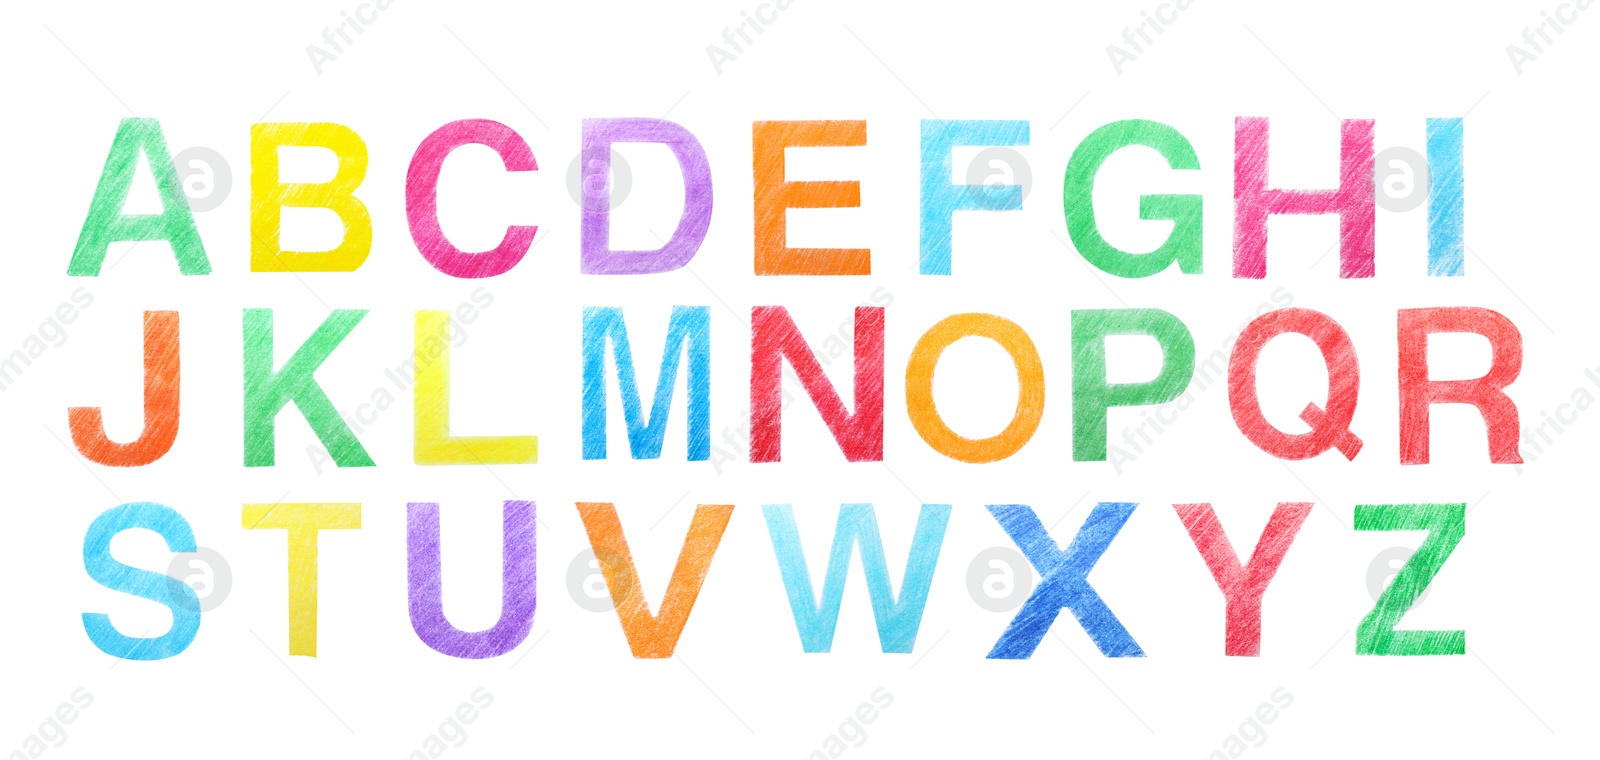 Image of Set of letters written with color pencils on white background, top view. Banner design